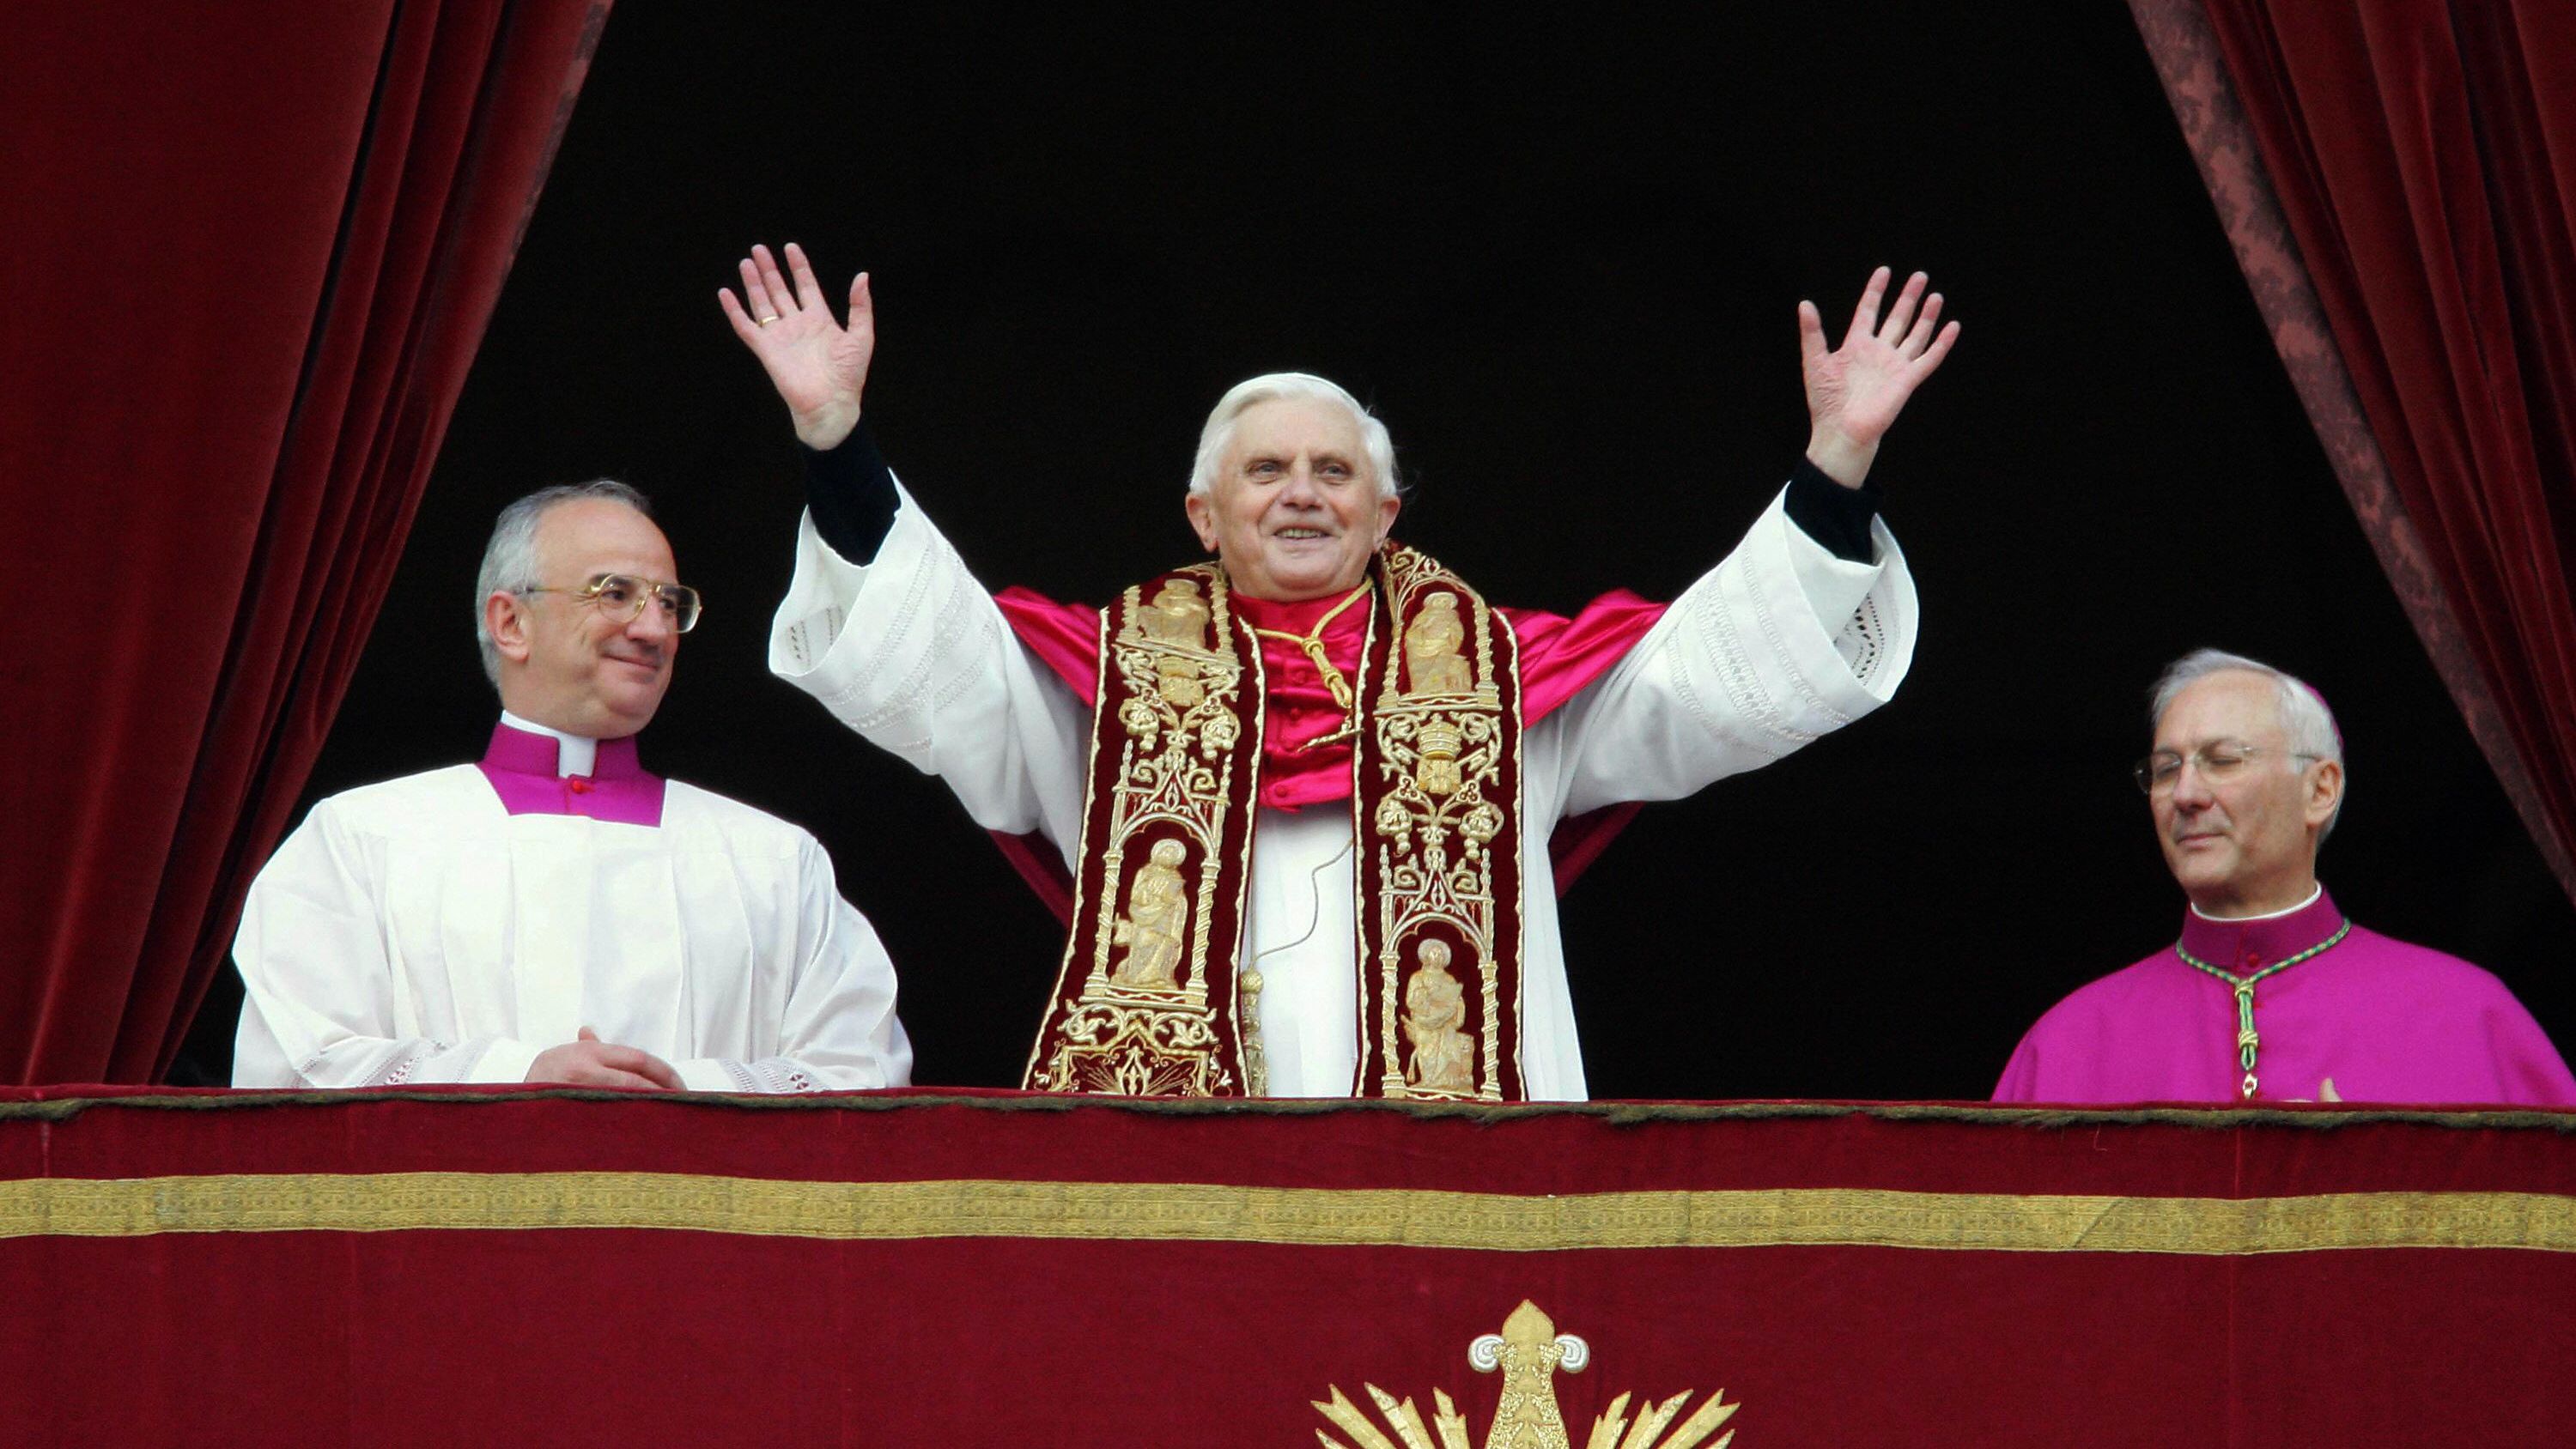 Pope Benedict XVI appears at the main balcony of St. Peter's Basilica after he was elected to be the new pope on April 19, 2005.